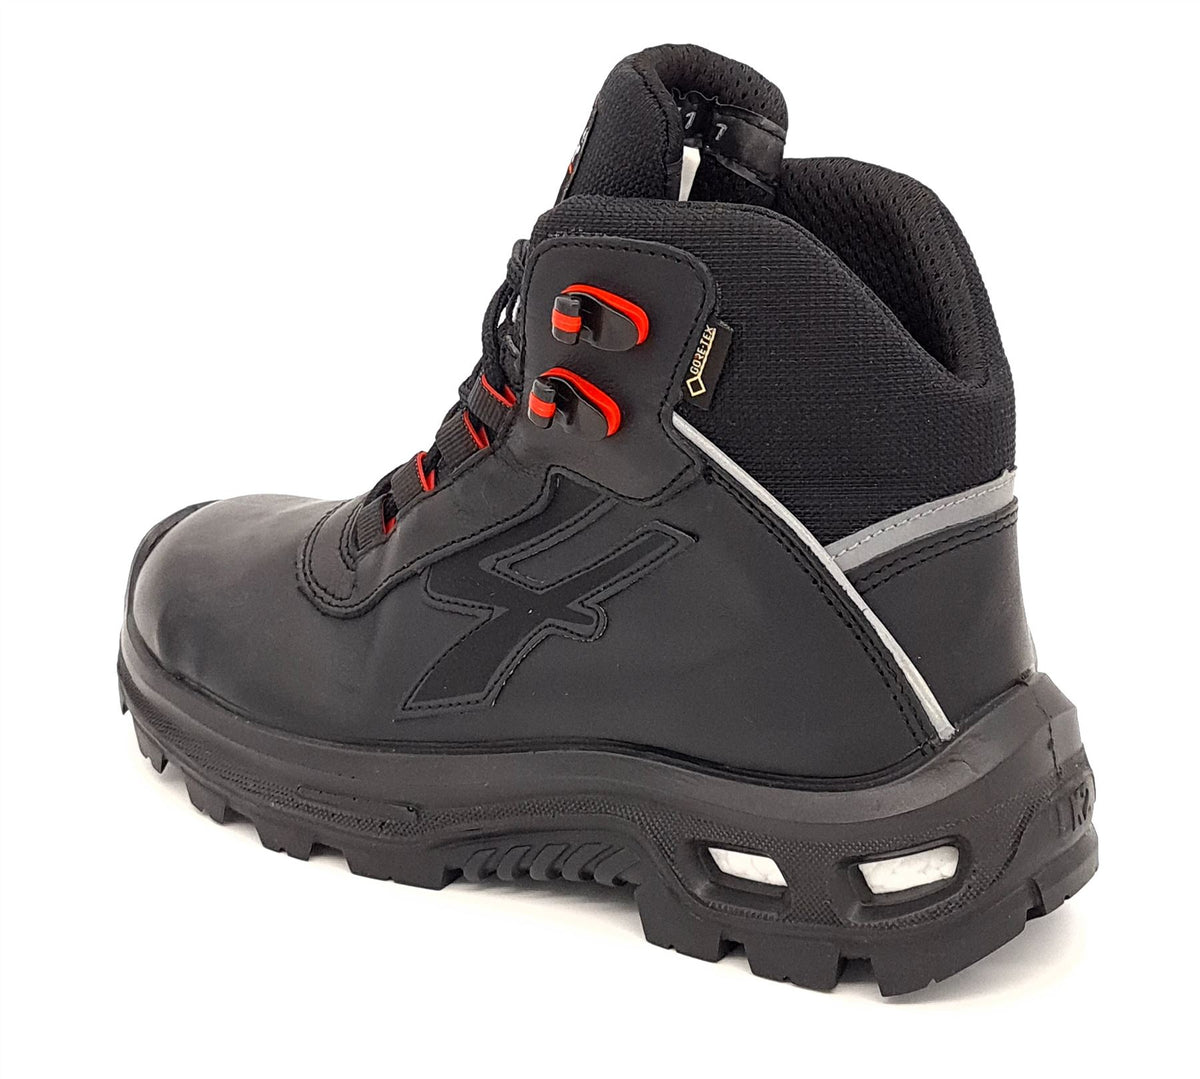 U-Power Legend Gore-Tex Vibram Leather Lace Up Infinergy Mens Safety Boots